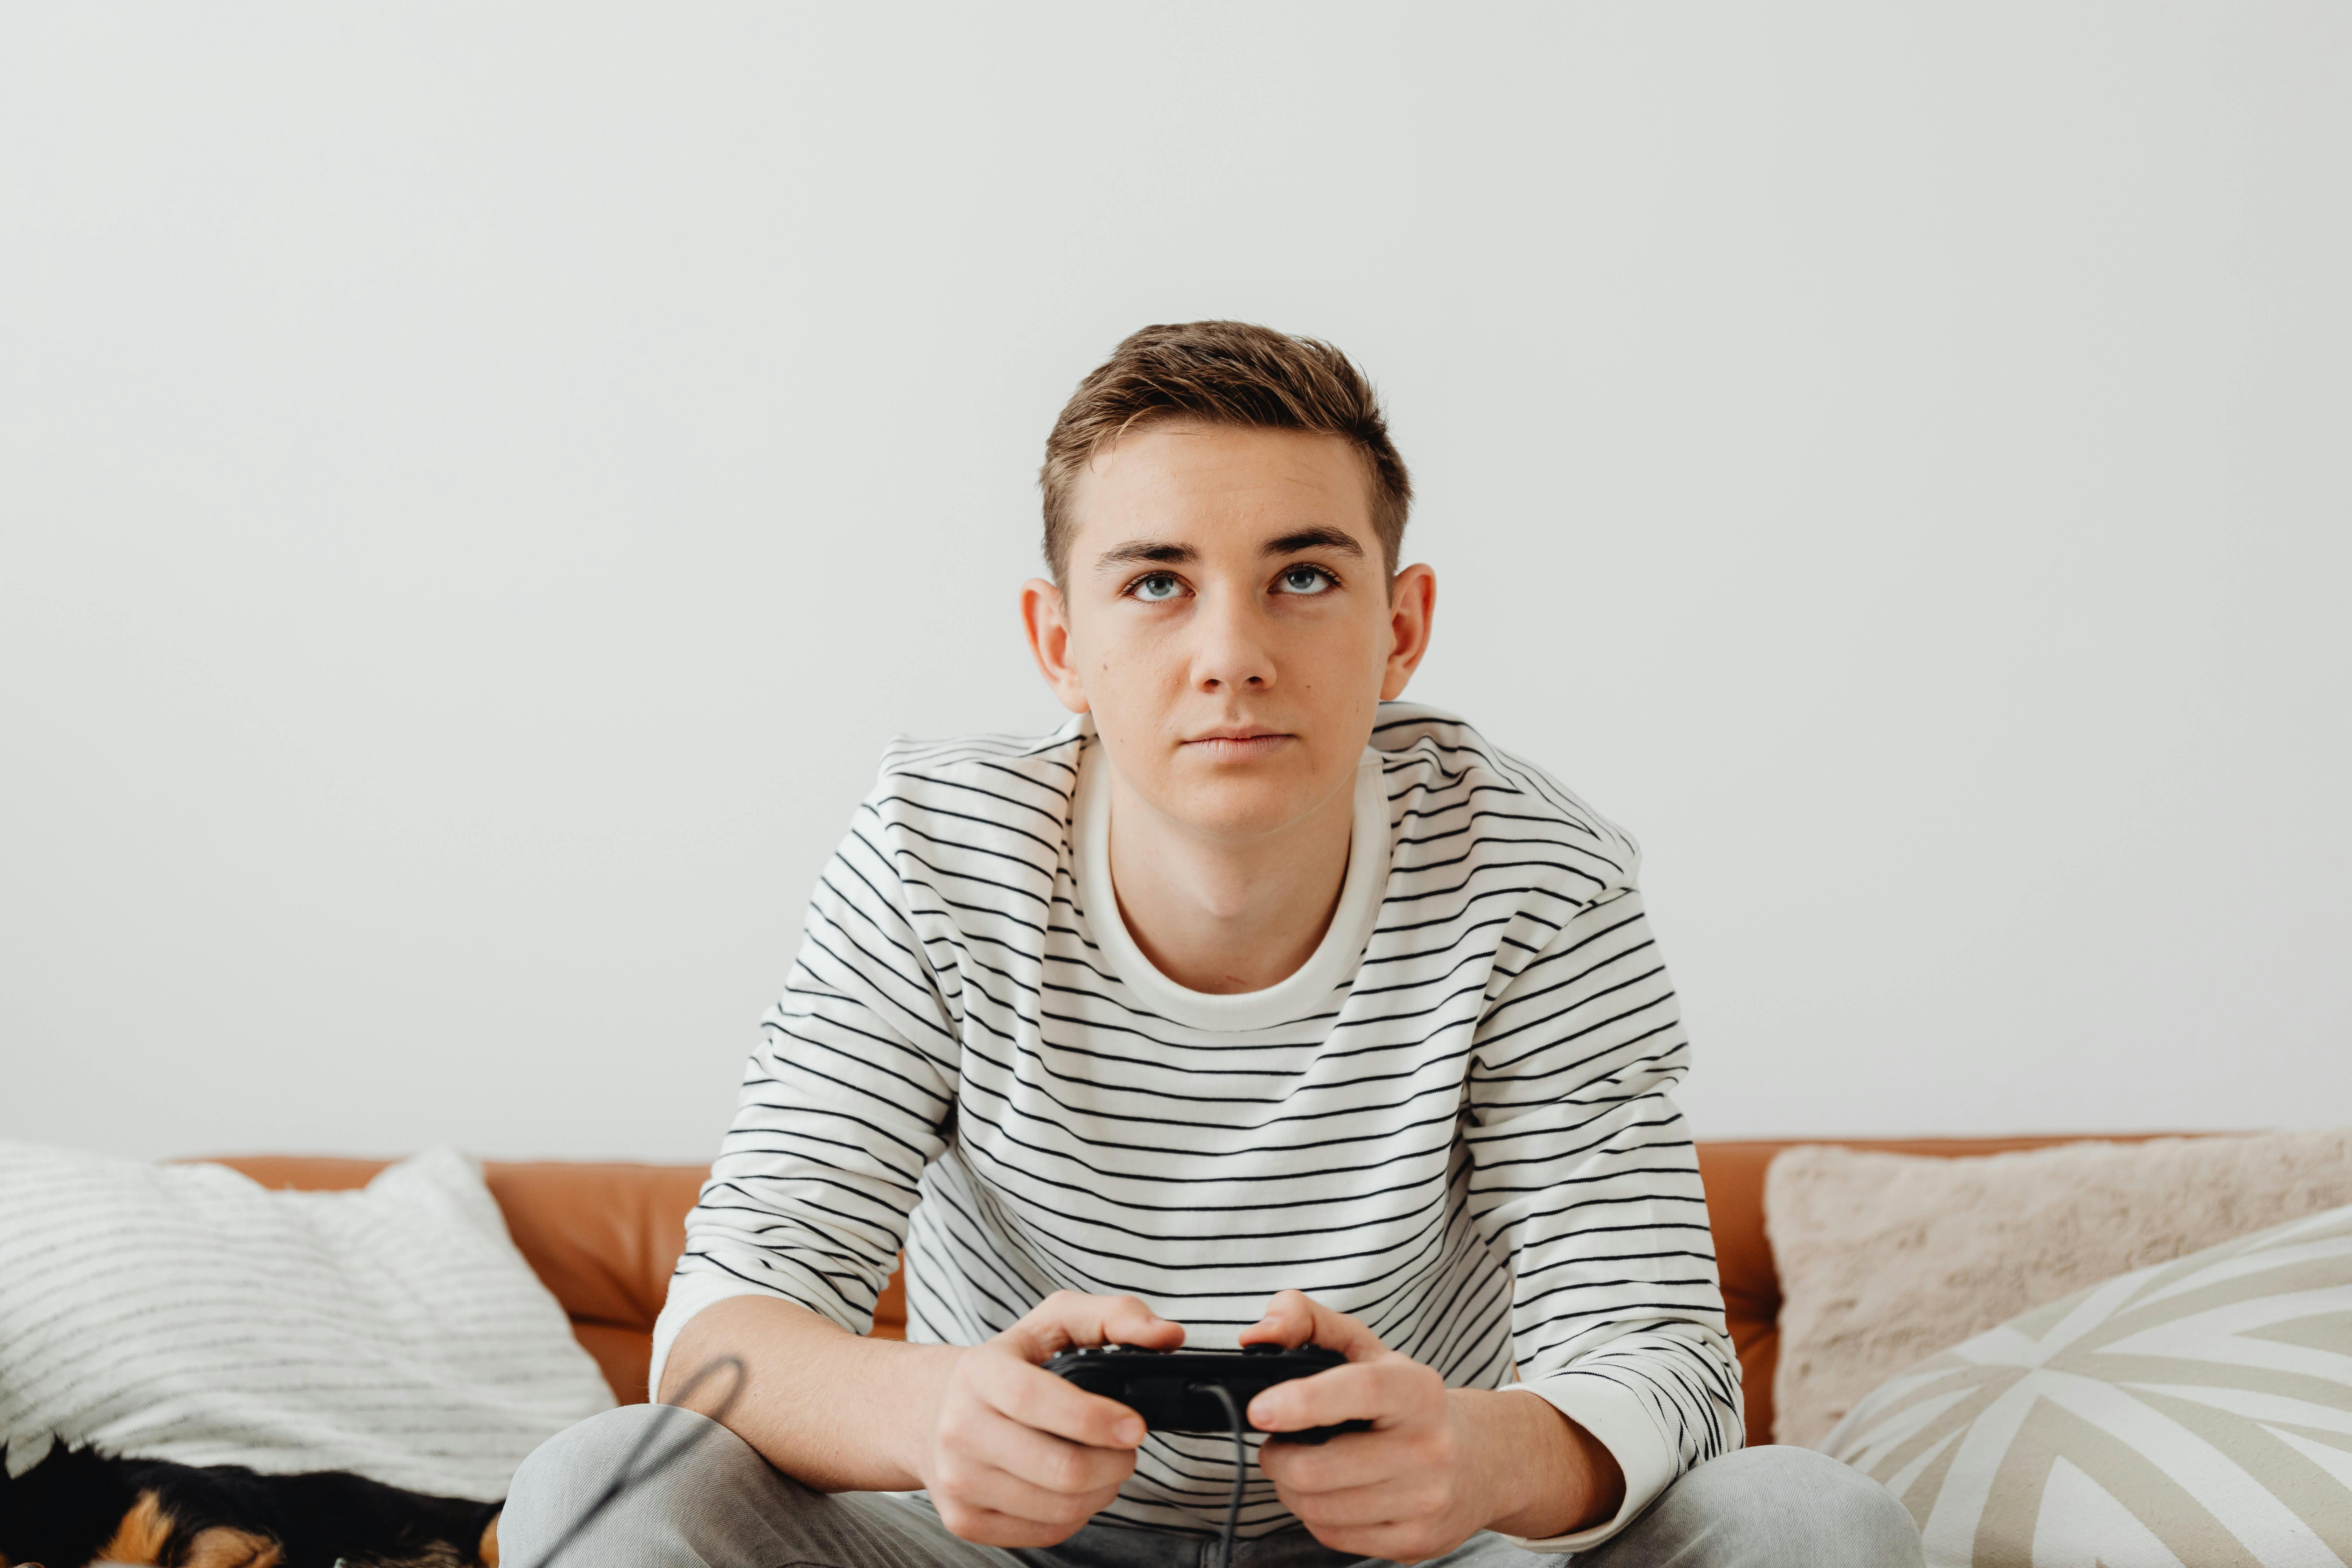 186 Sitting On Ground Playing Video Games Stock Photos, High-Res